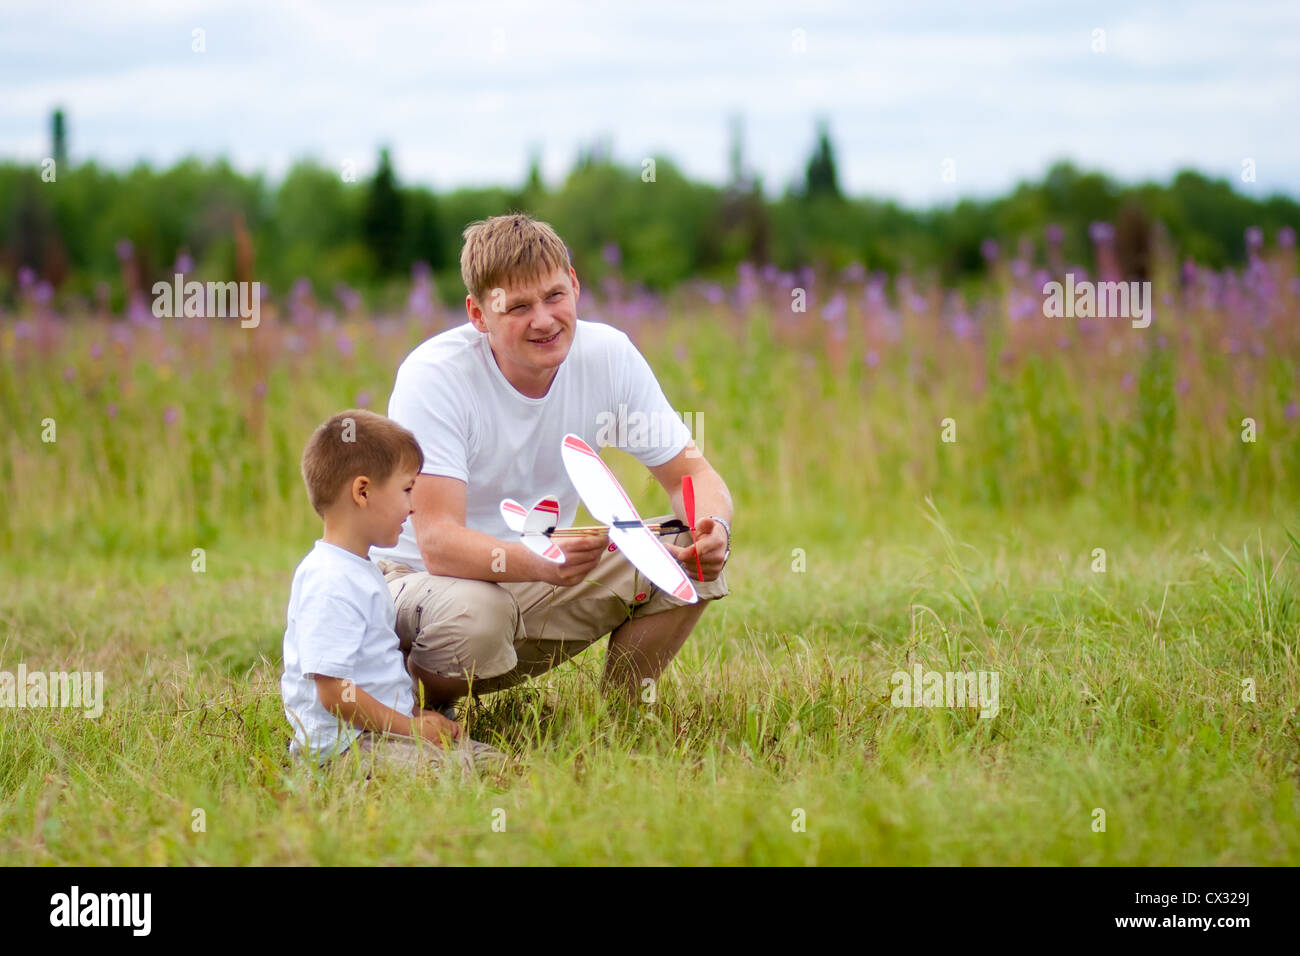 Father and son launch plane model in summer field Stock Photo